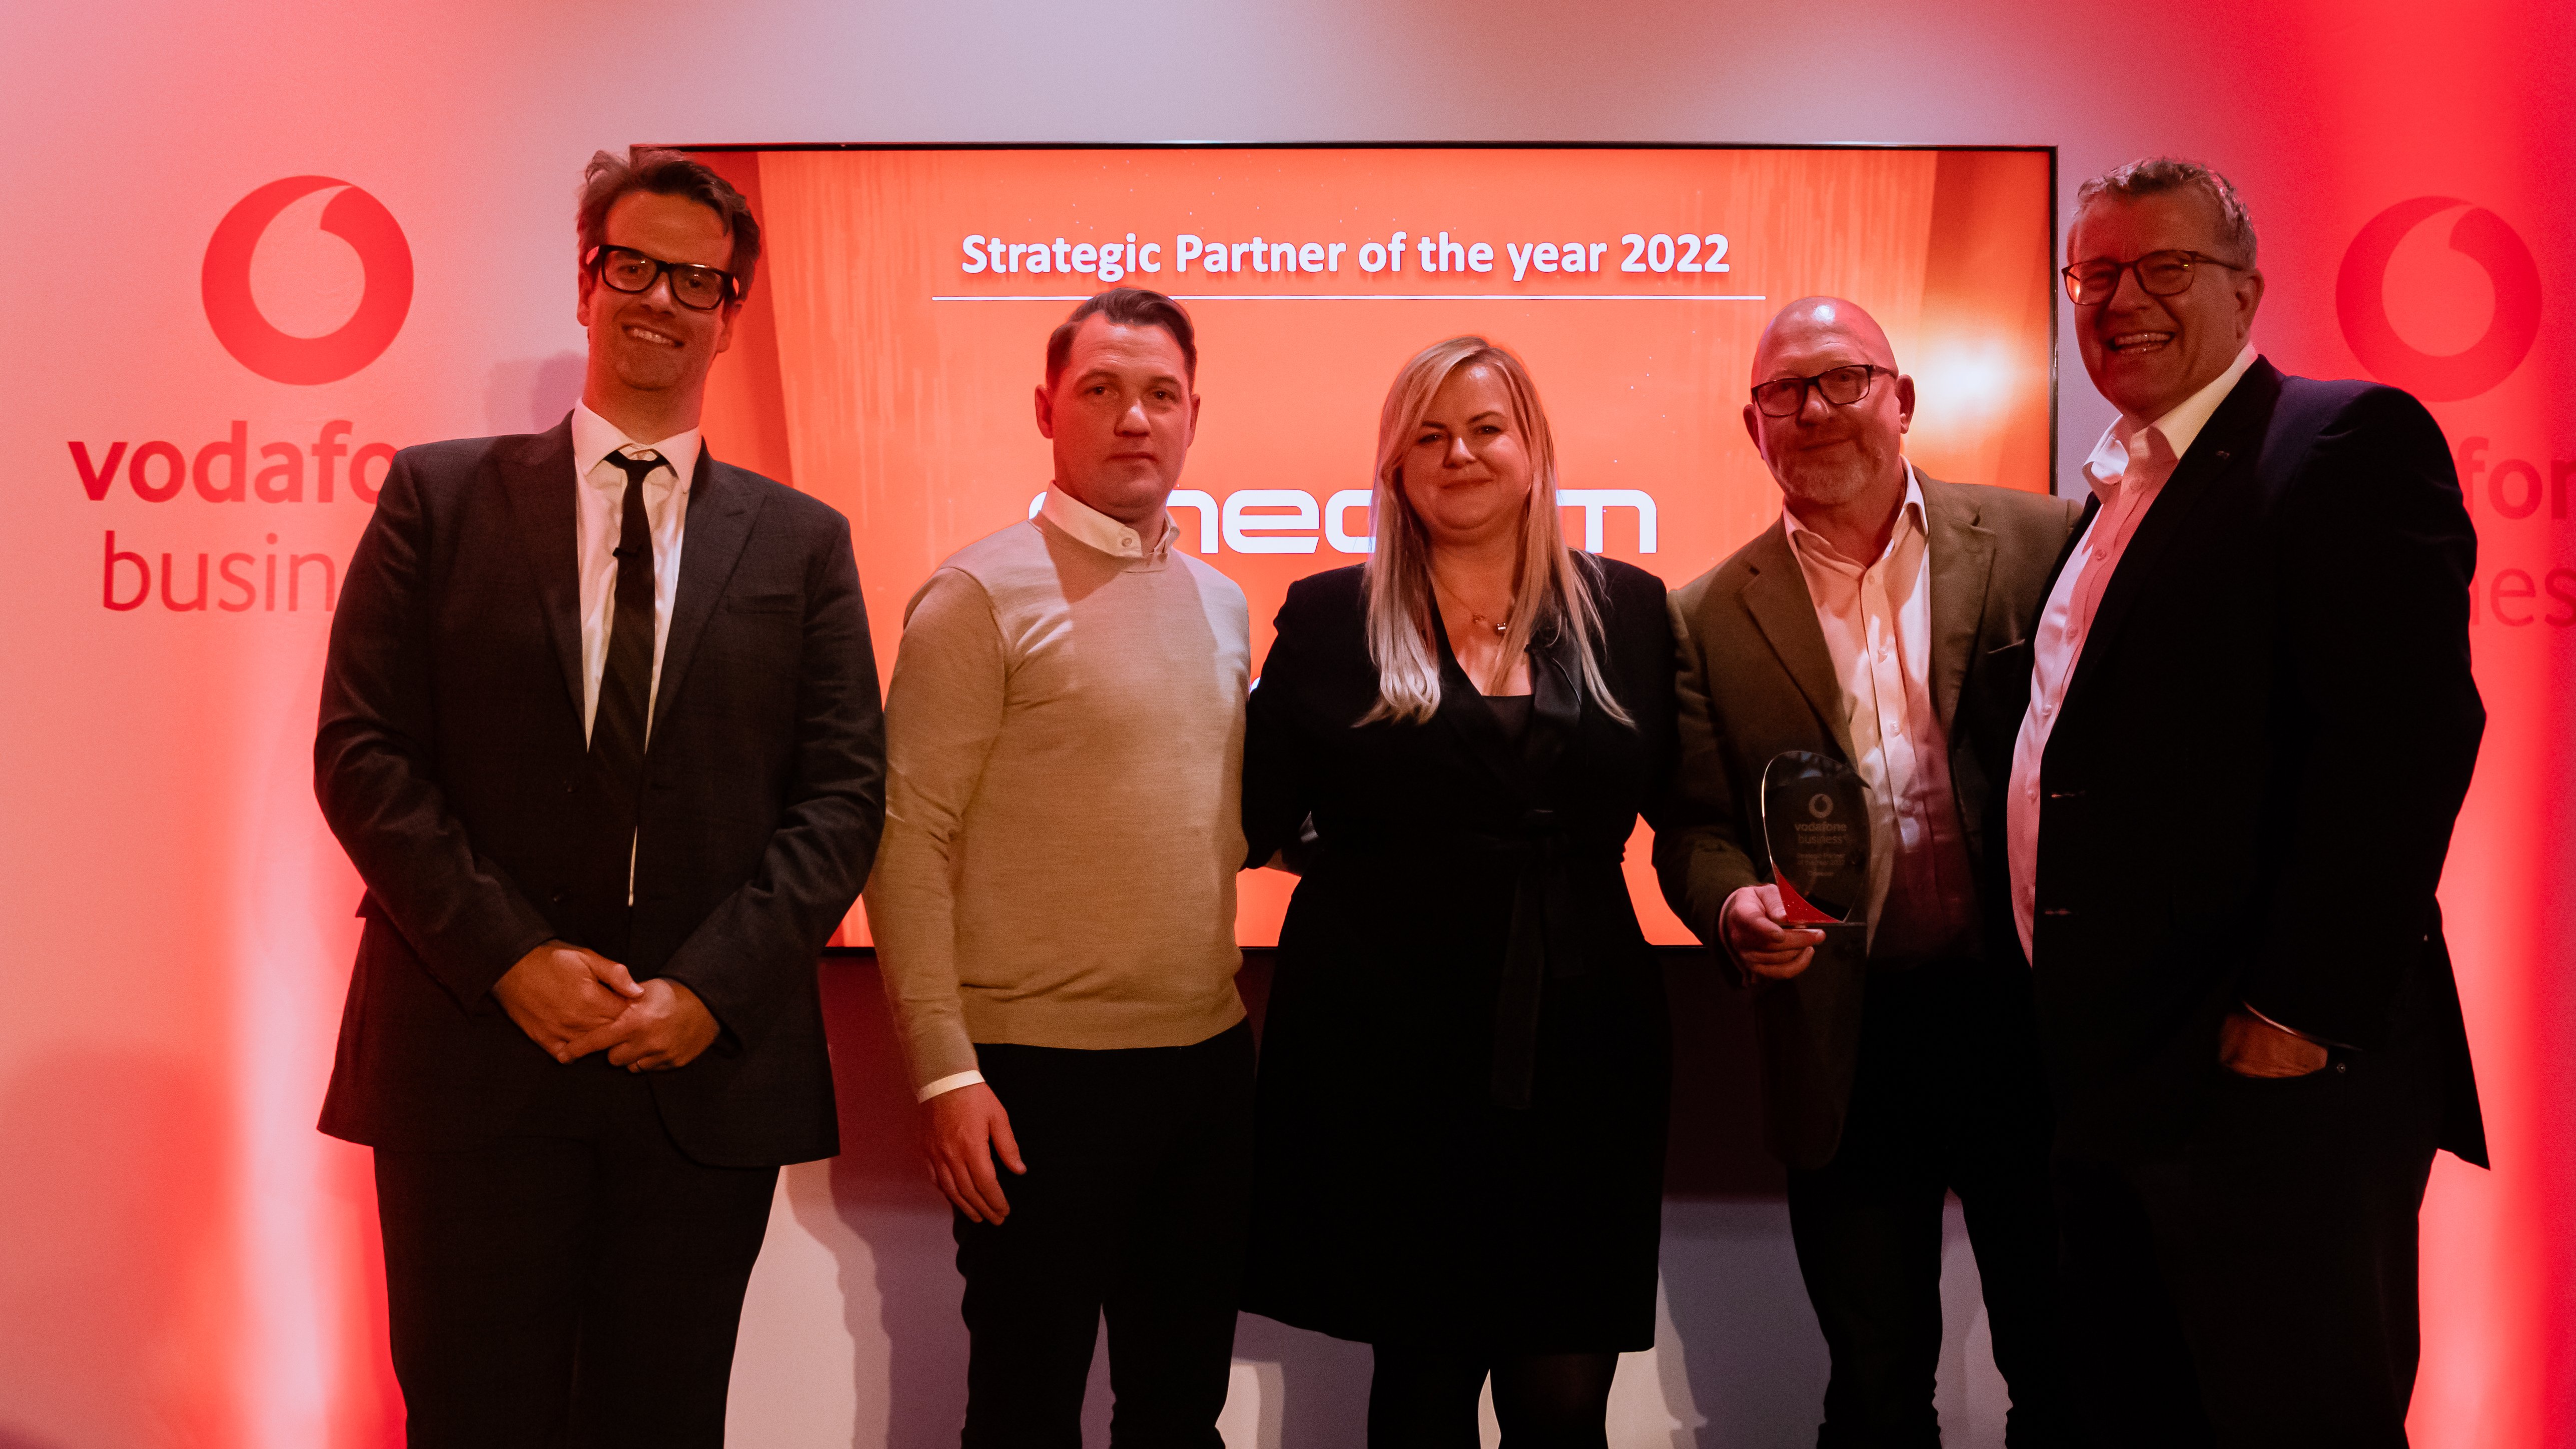 Lucky for some! Onecom is named top Vodafone Partner for 13th consecutive year